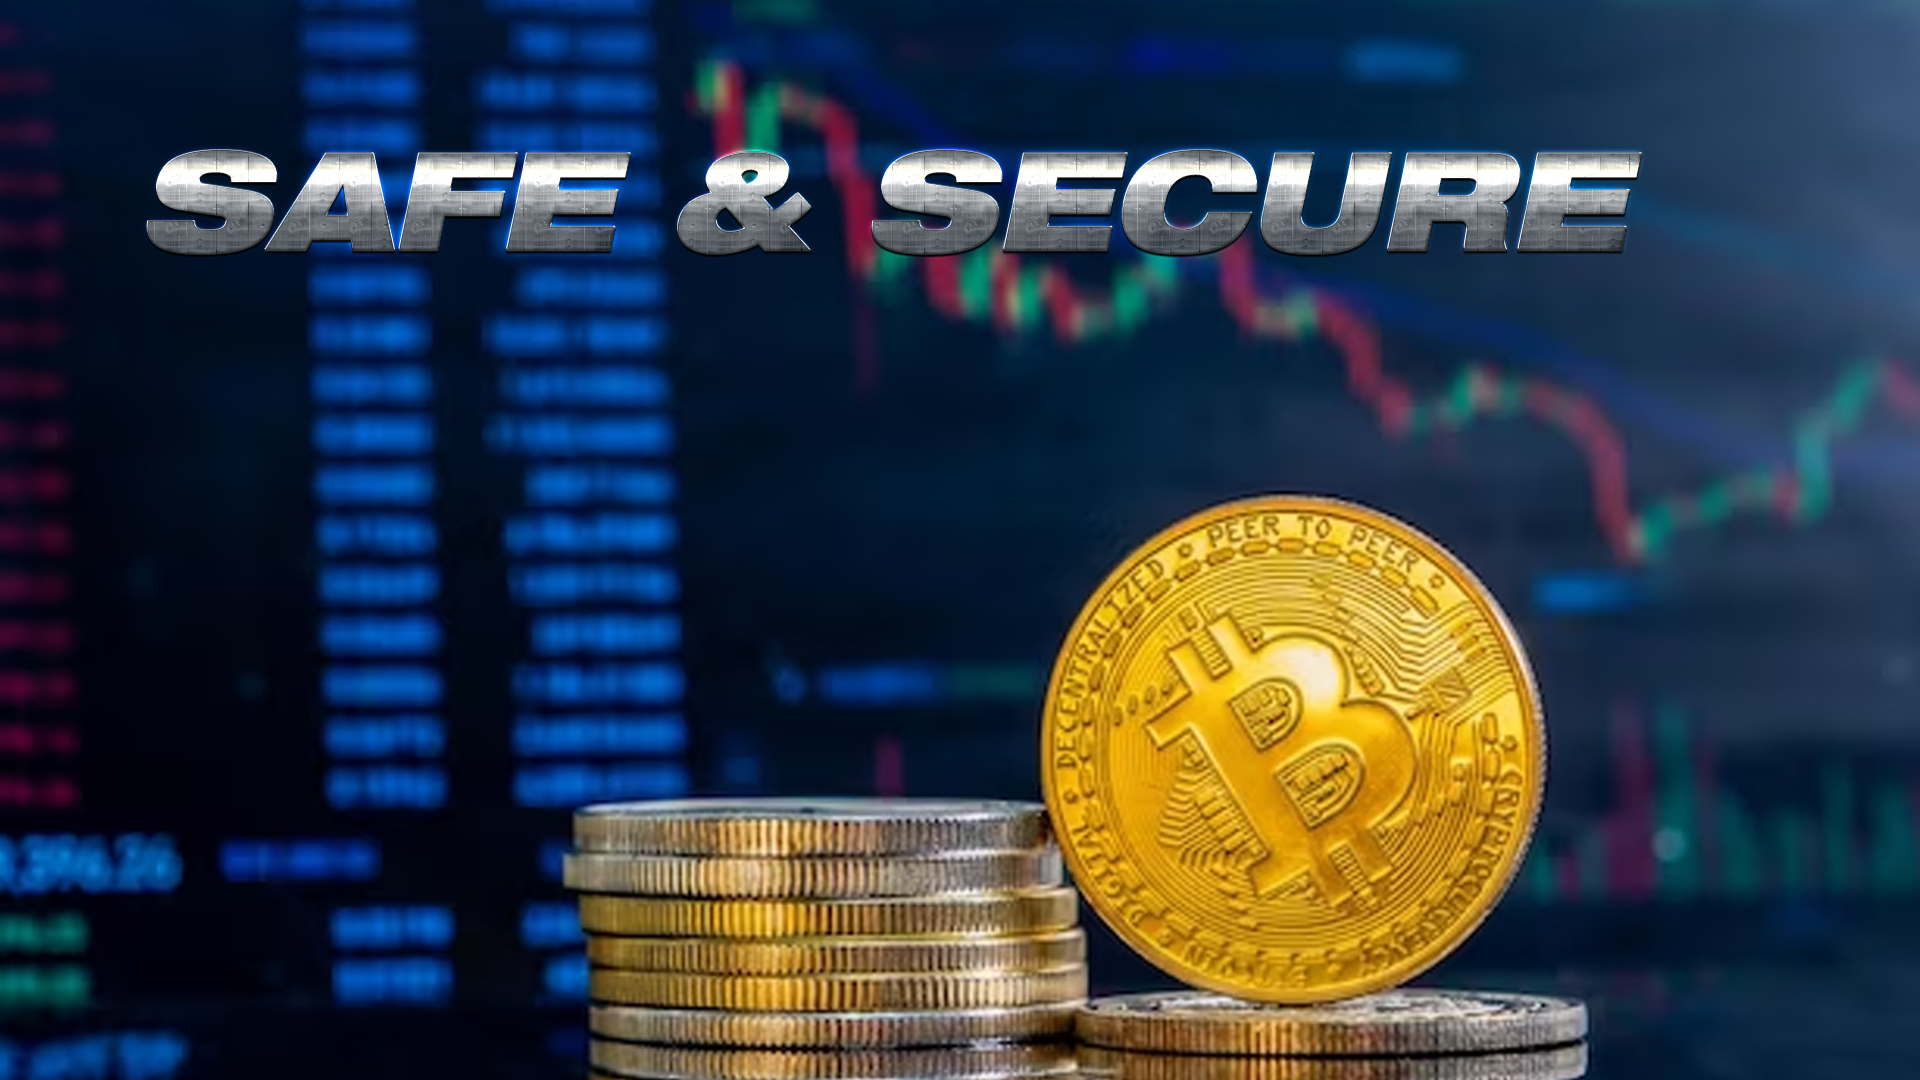 Peer-to-Peer Cryptocurrency: Safe and Secure Trading